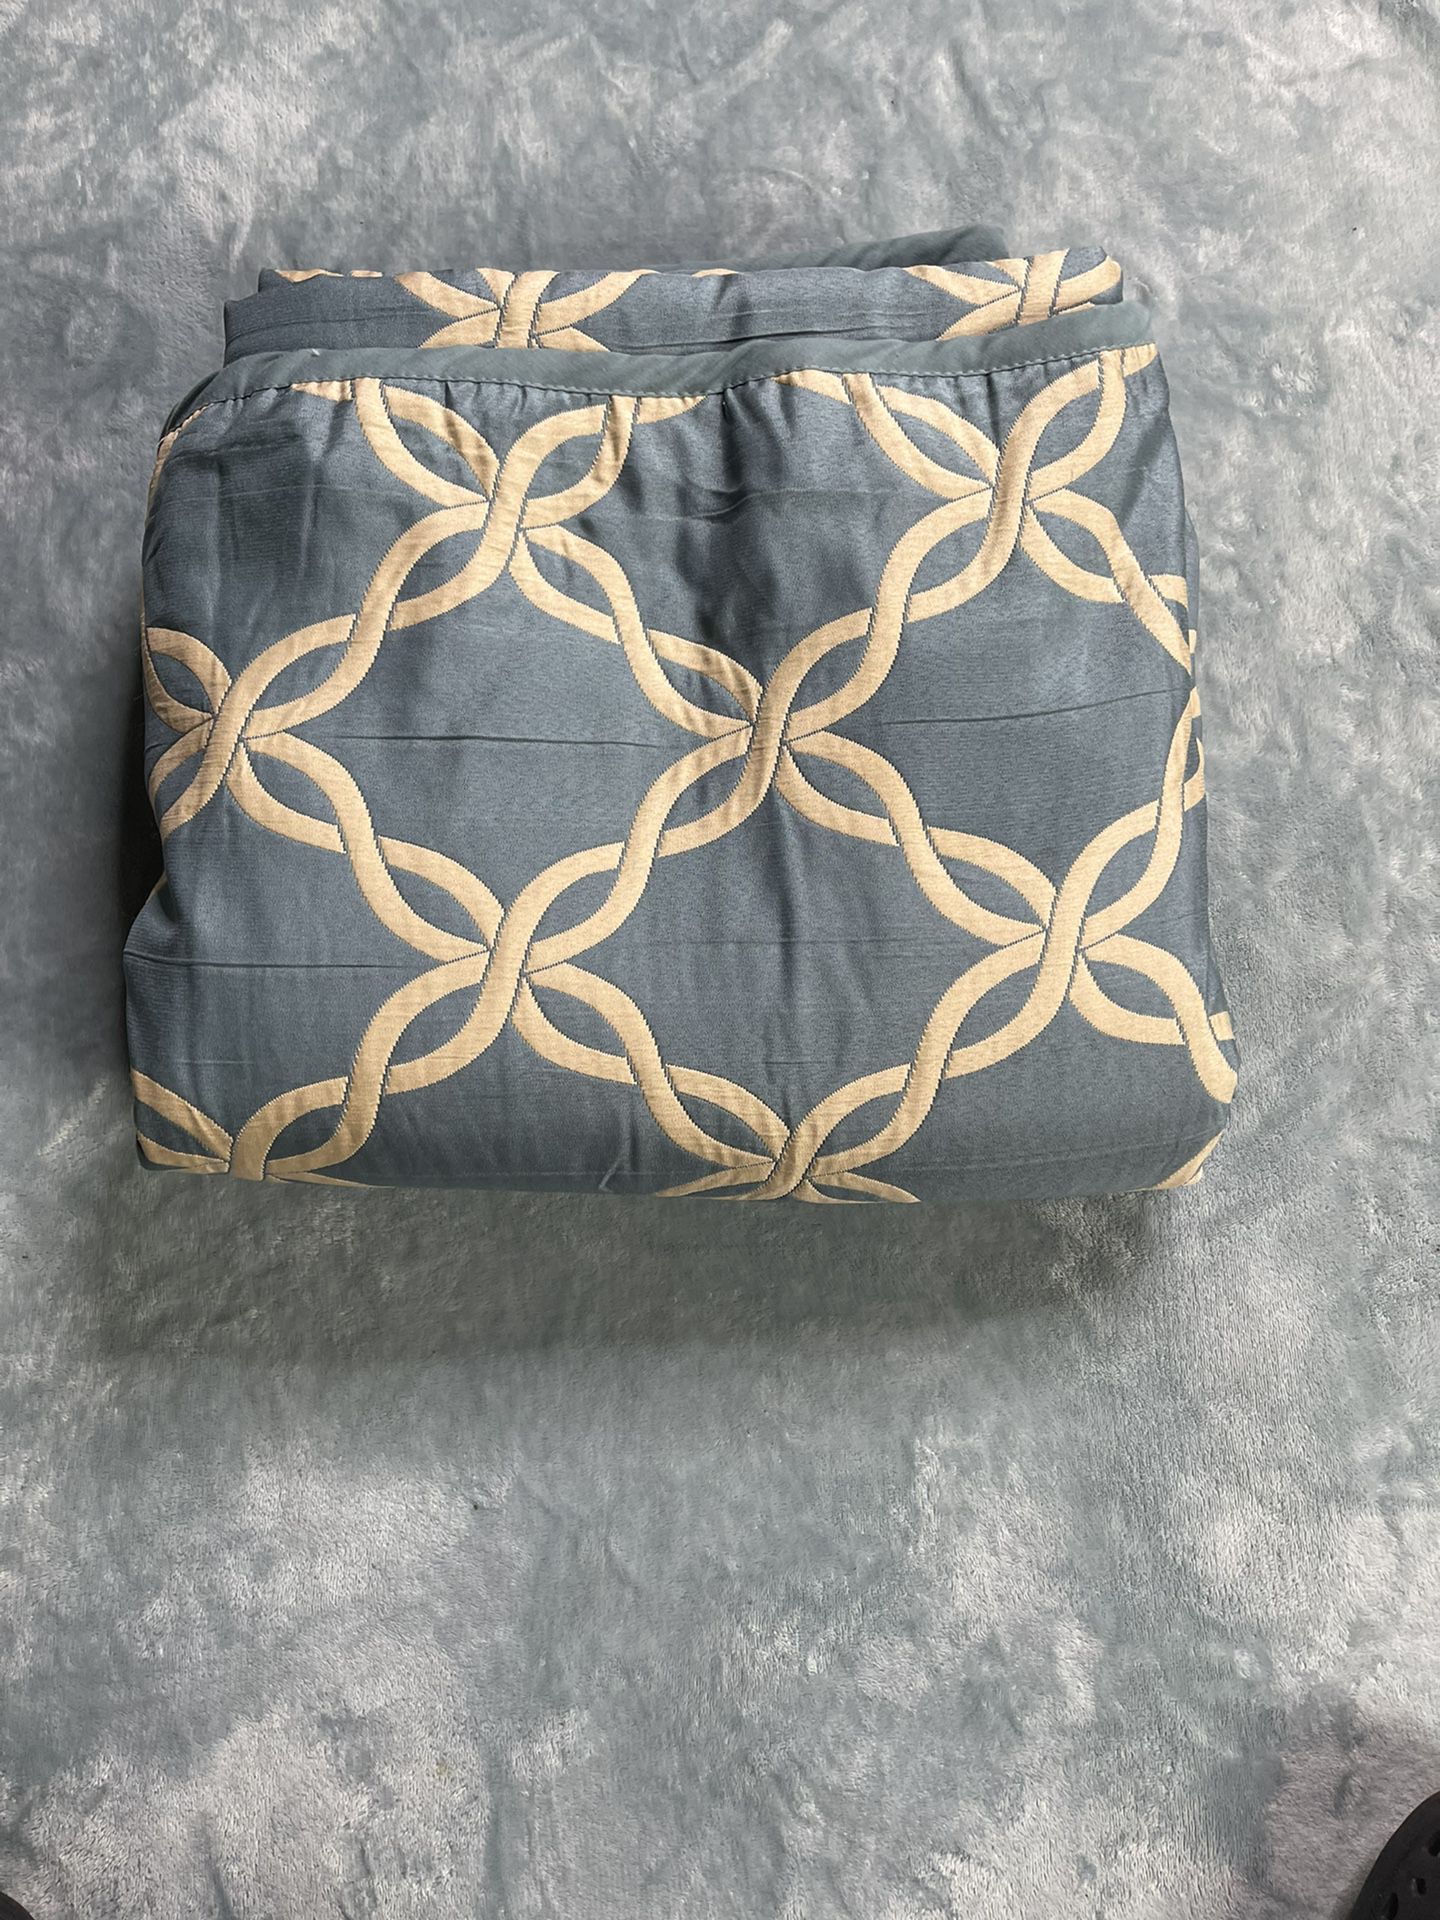 Reversible Over Sized Decorative Blue And Tan Blanket